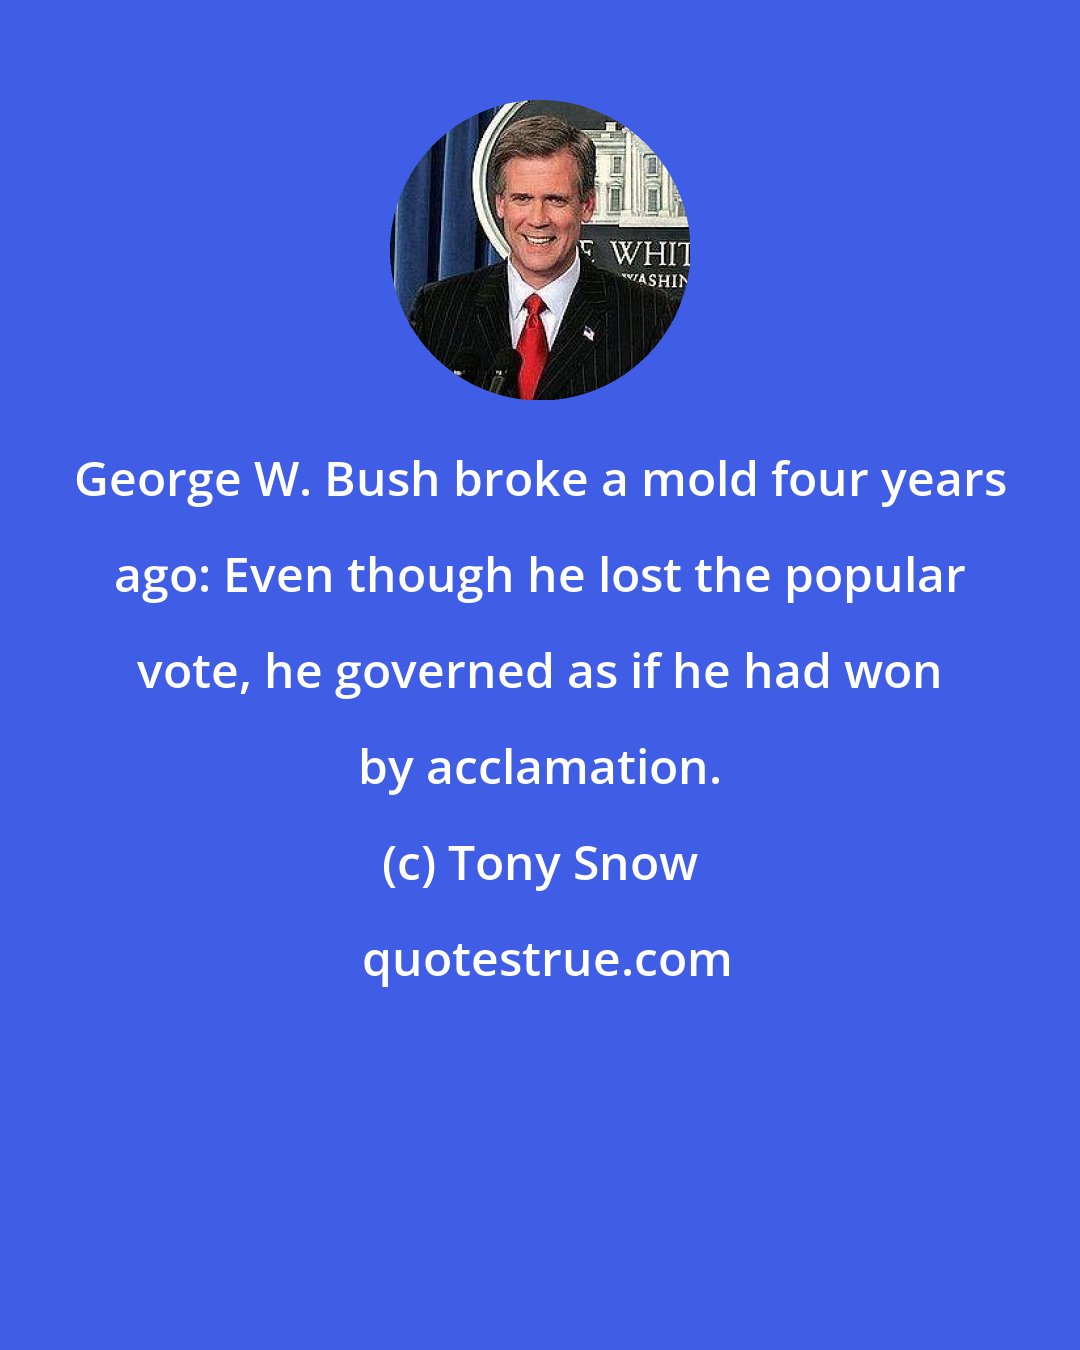 Tony Snow: George W. Bush broke a mold four years ago: Even though he lost the popular vote, he governed as if he had won by acclamation.